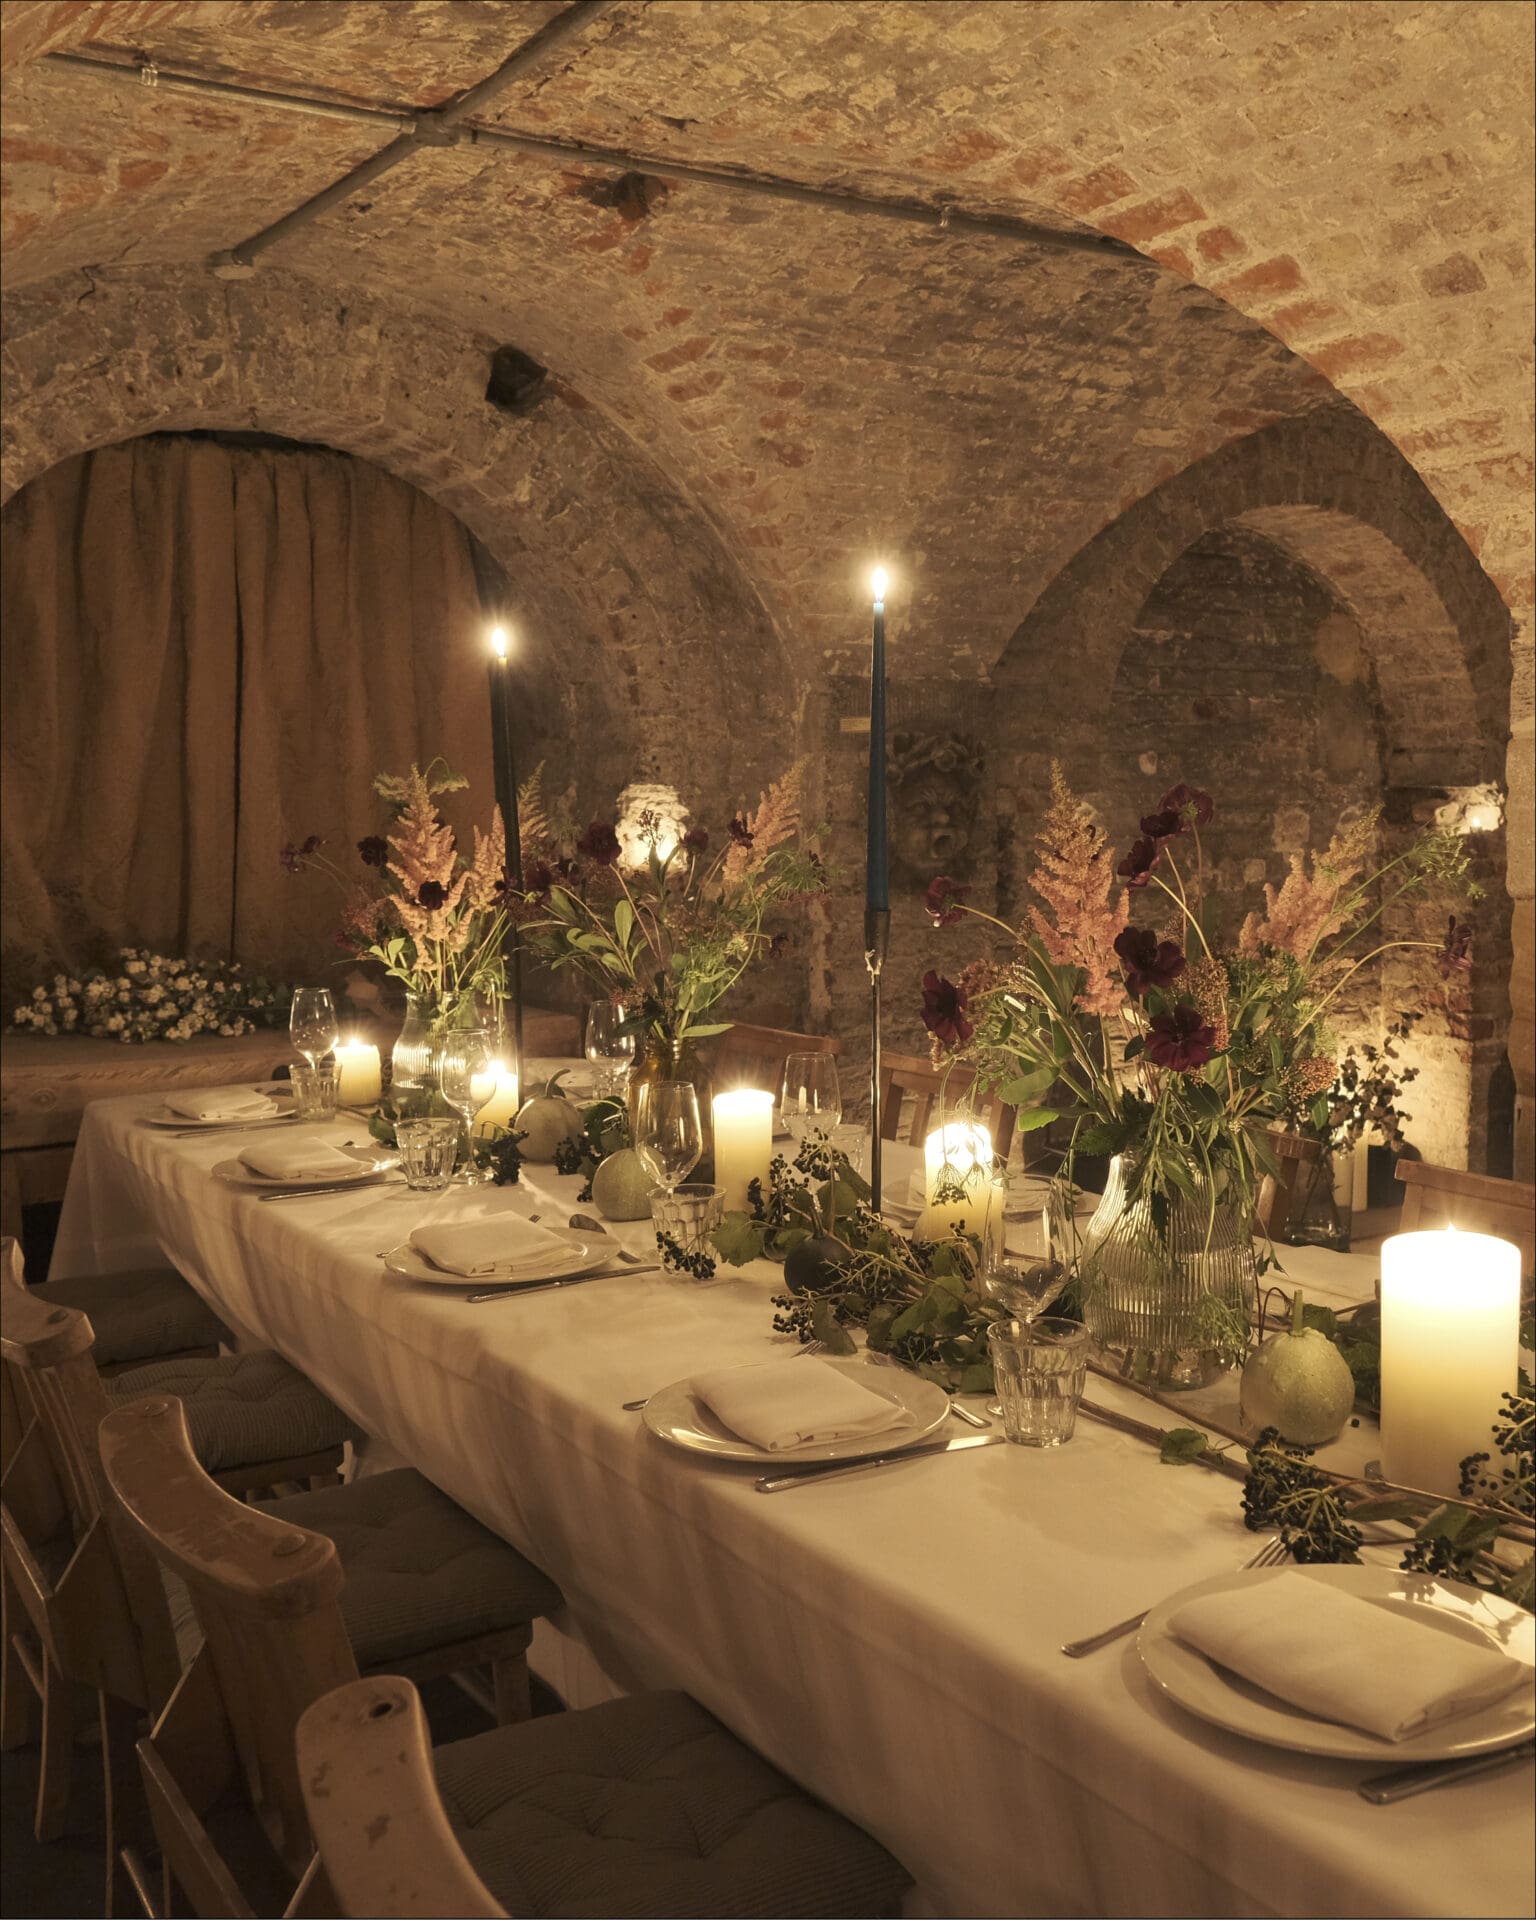 The best private dining rooms in London | One of the candlelit vault-style private dining rooms at Brunswick House, Vauxhall